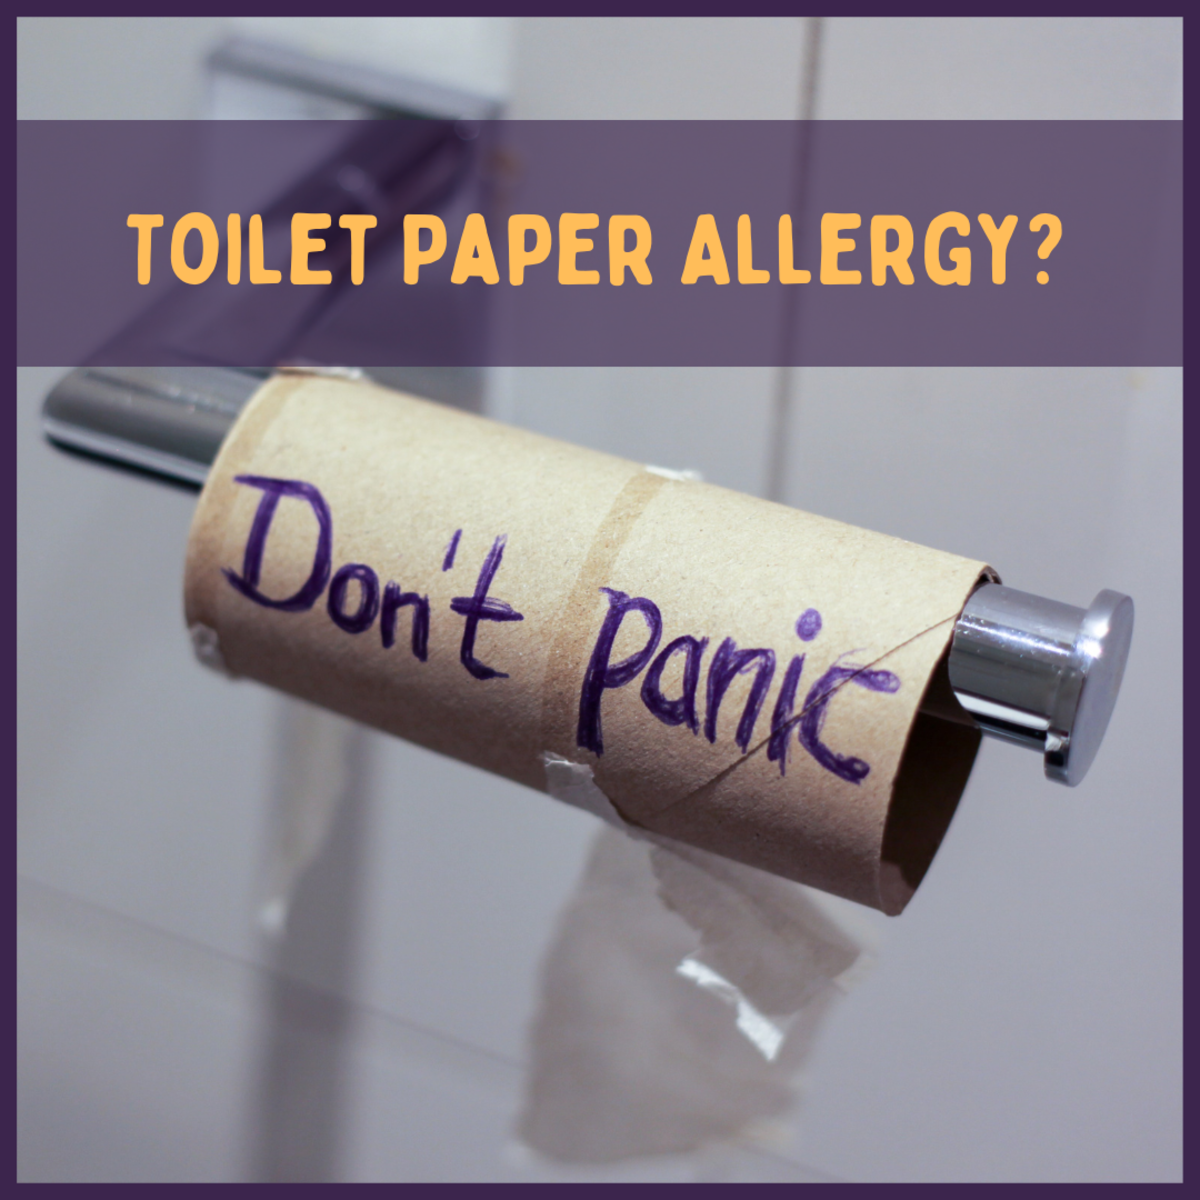 What should you do if you have a toilet paper allergy?